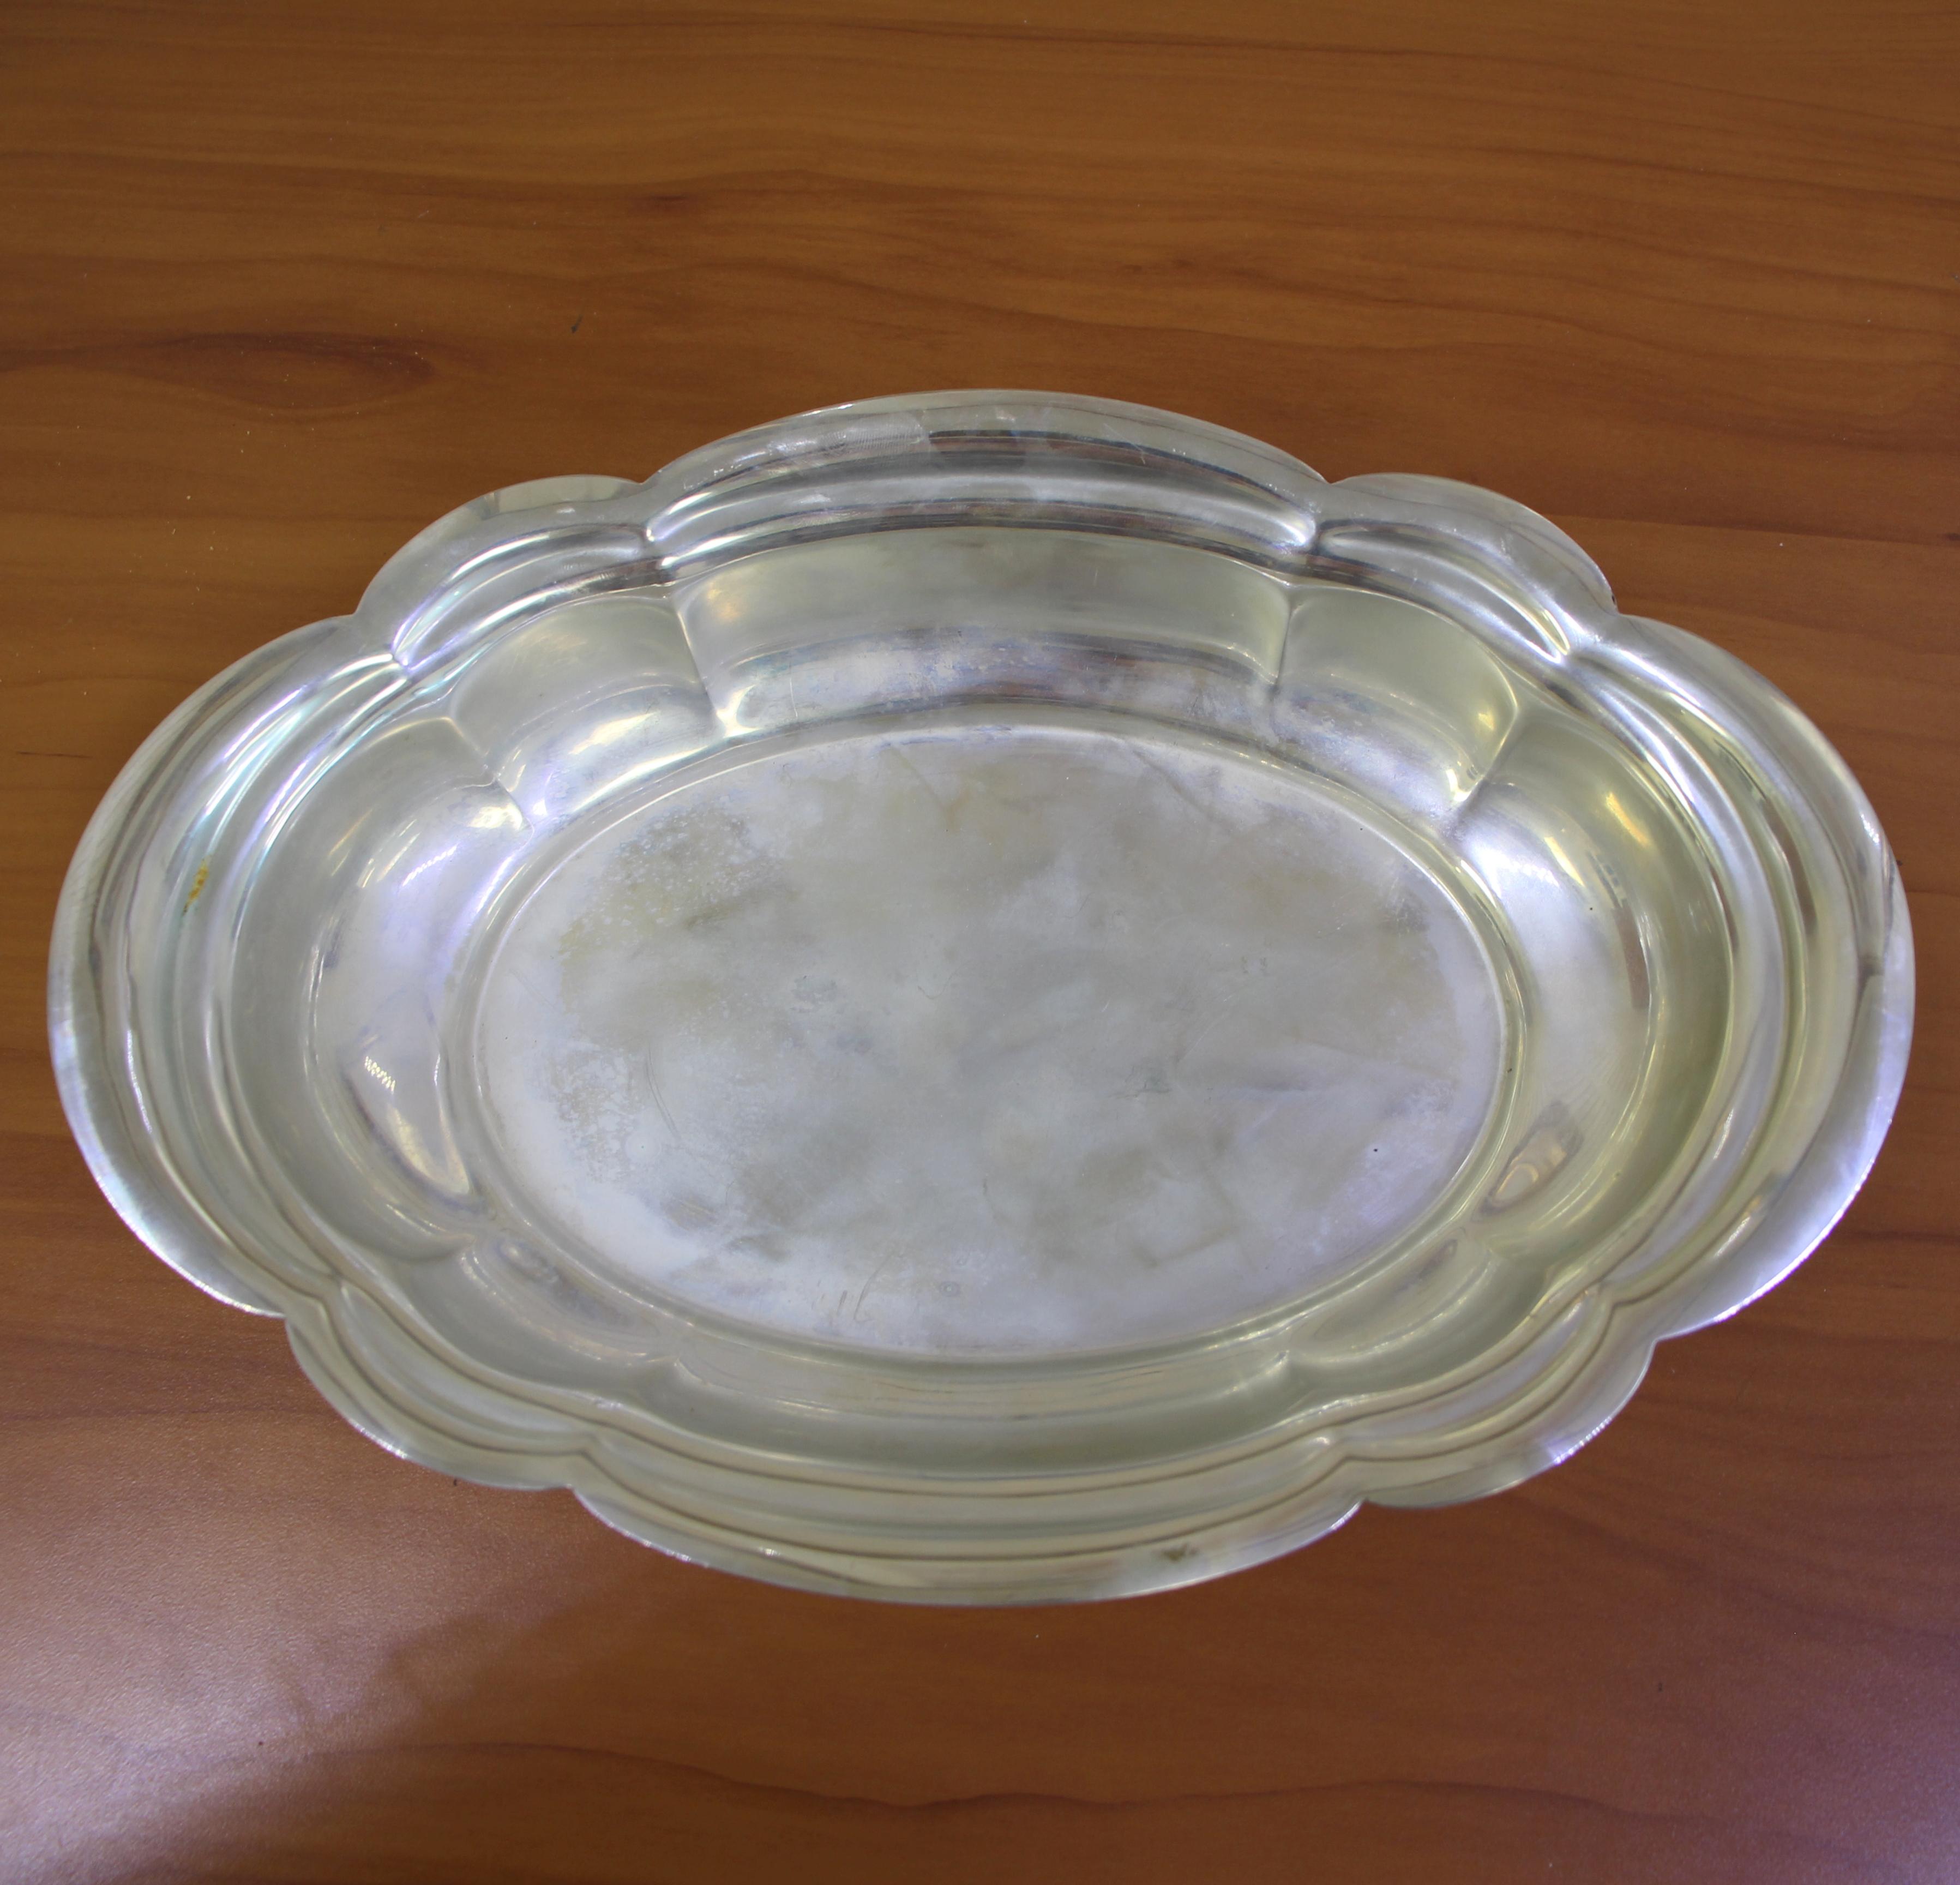 Wallace Quincy Vegetable Bowl Model 212 In .925 Sterling Silver